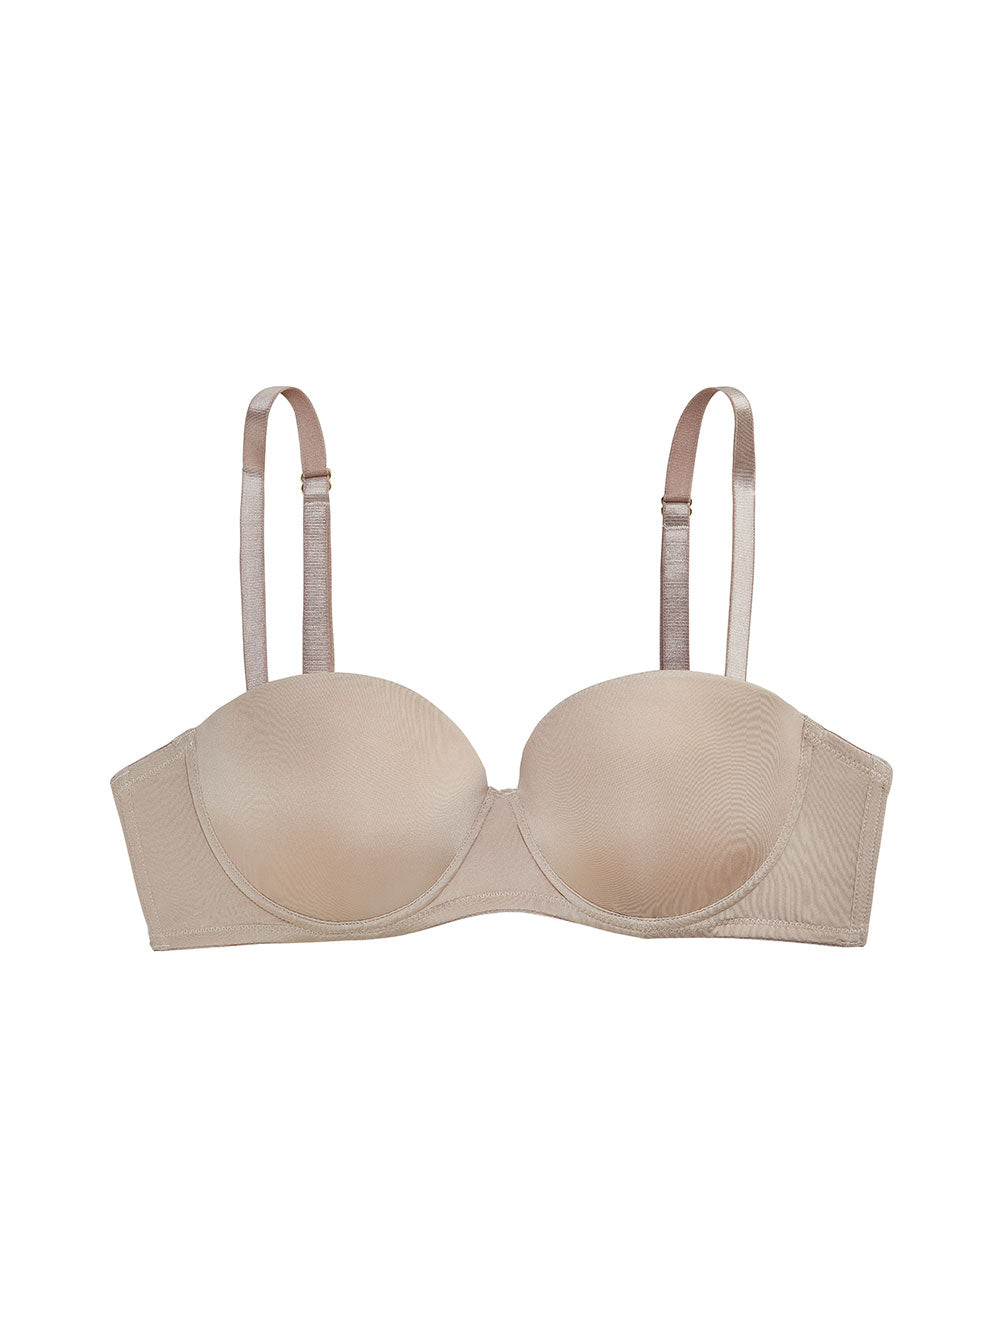 Sascha Smooth Bra, Petite, Strapless, Push-up, Demi-cup, AA-D Cups